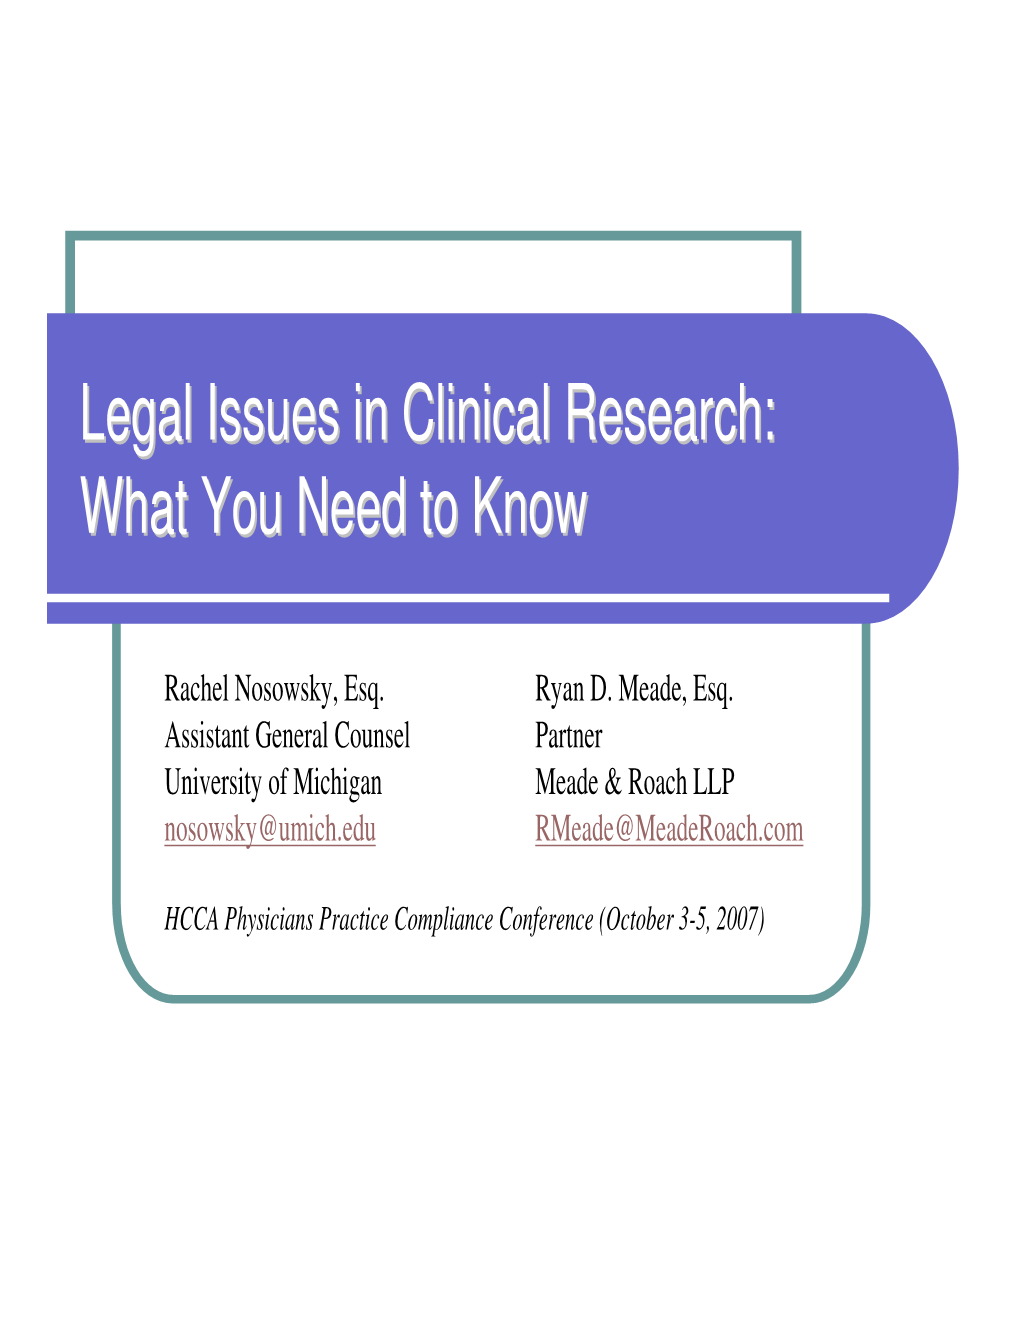 Legal Issues in Clinical Research: What You Need to Know